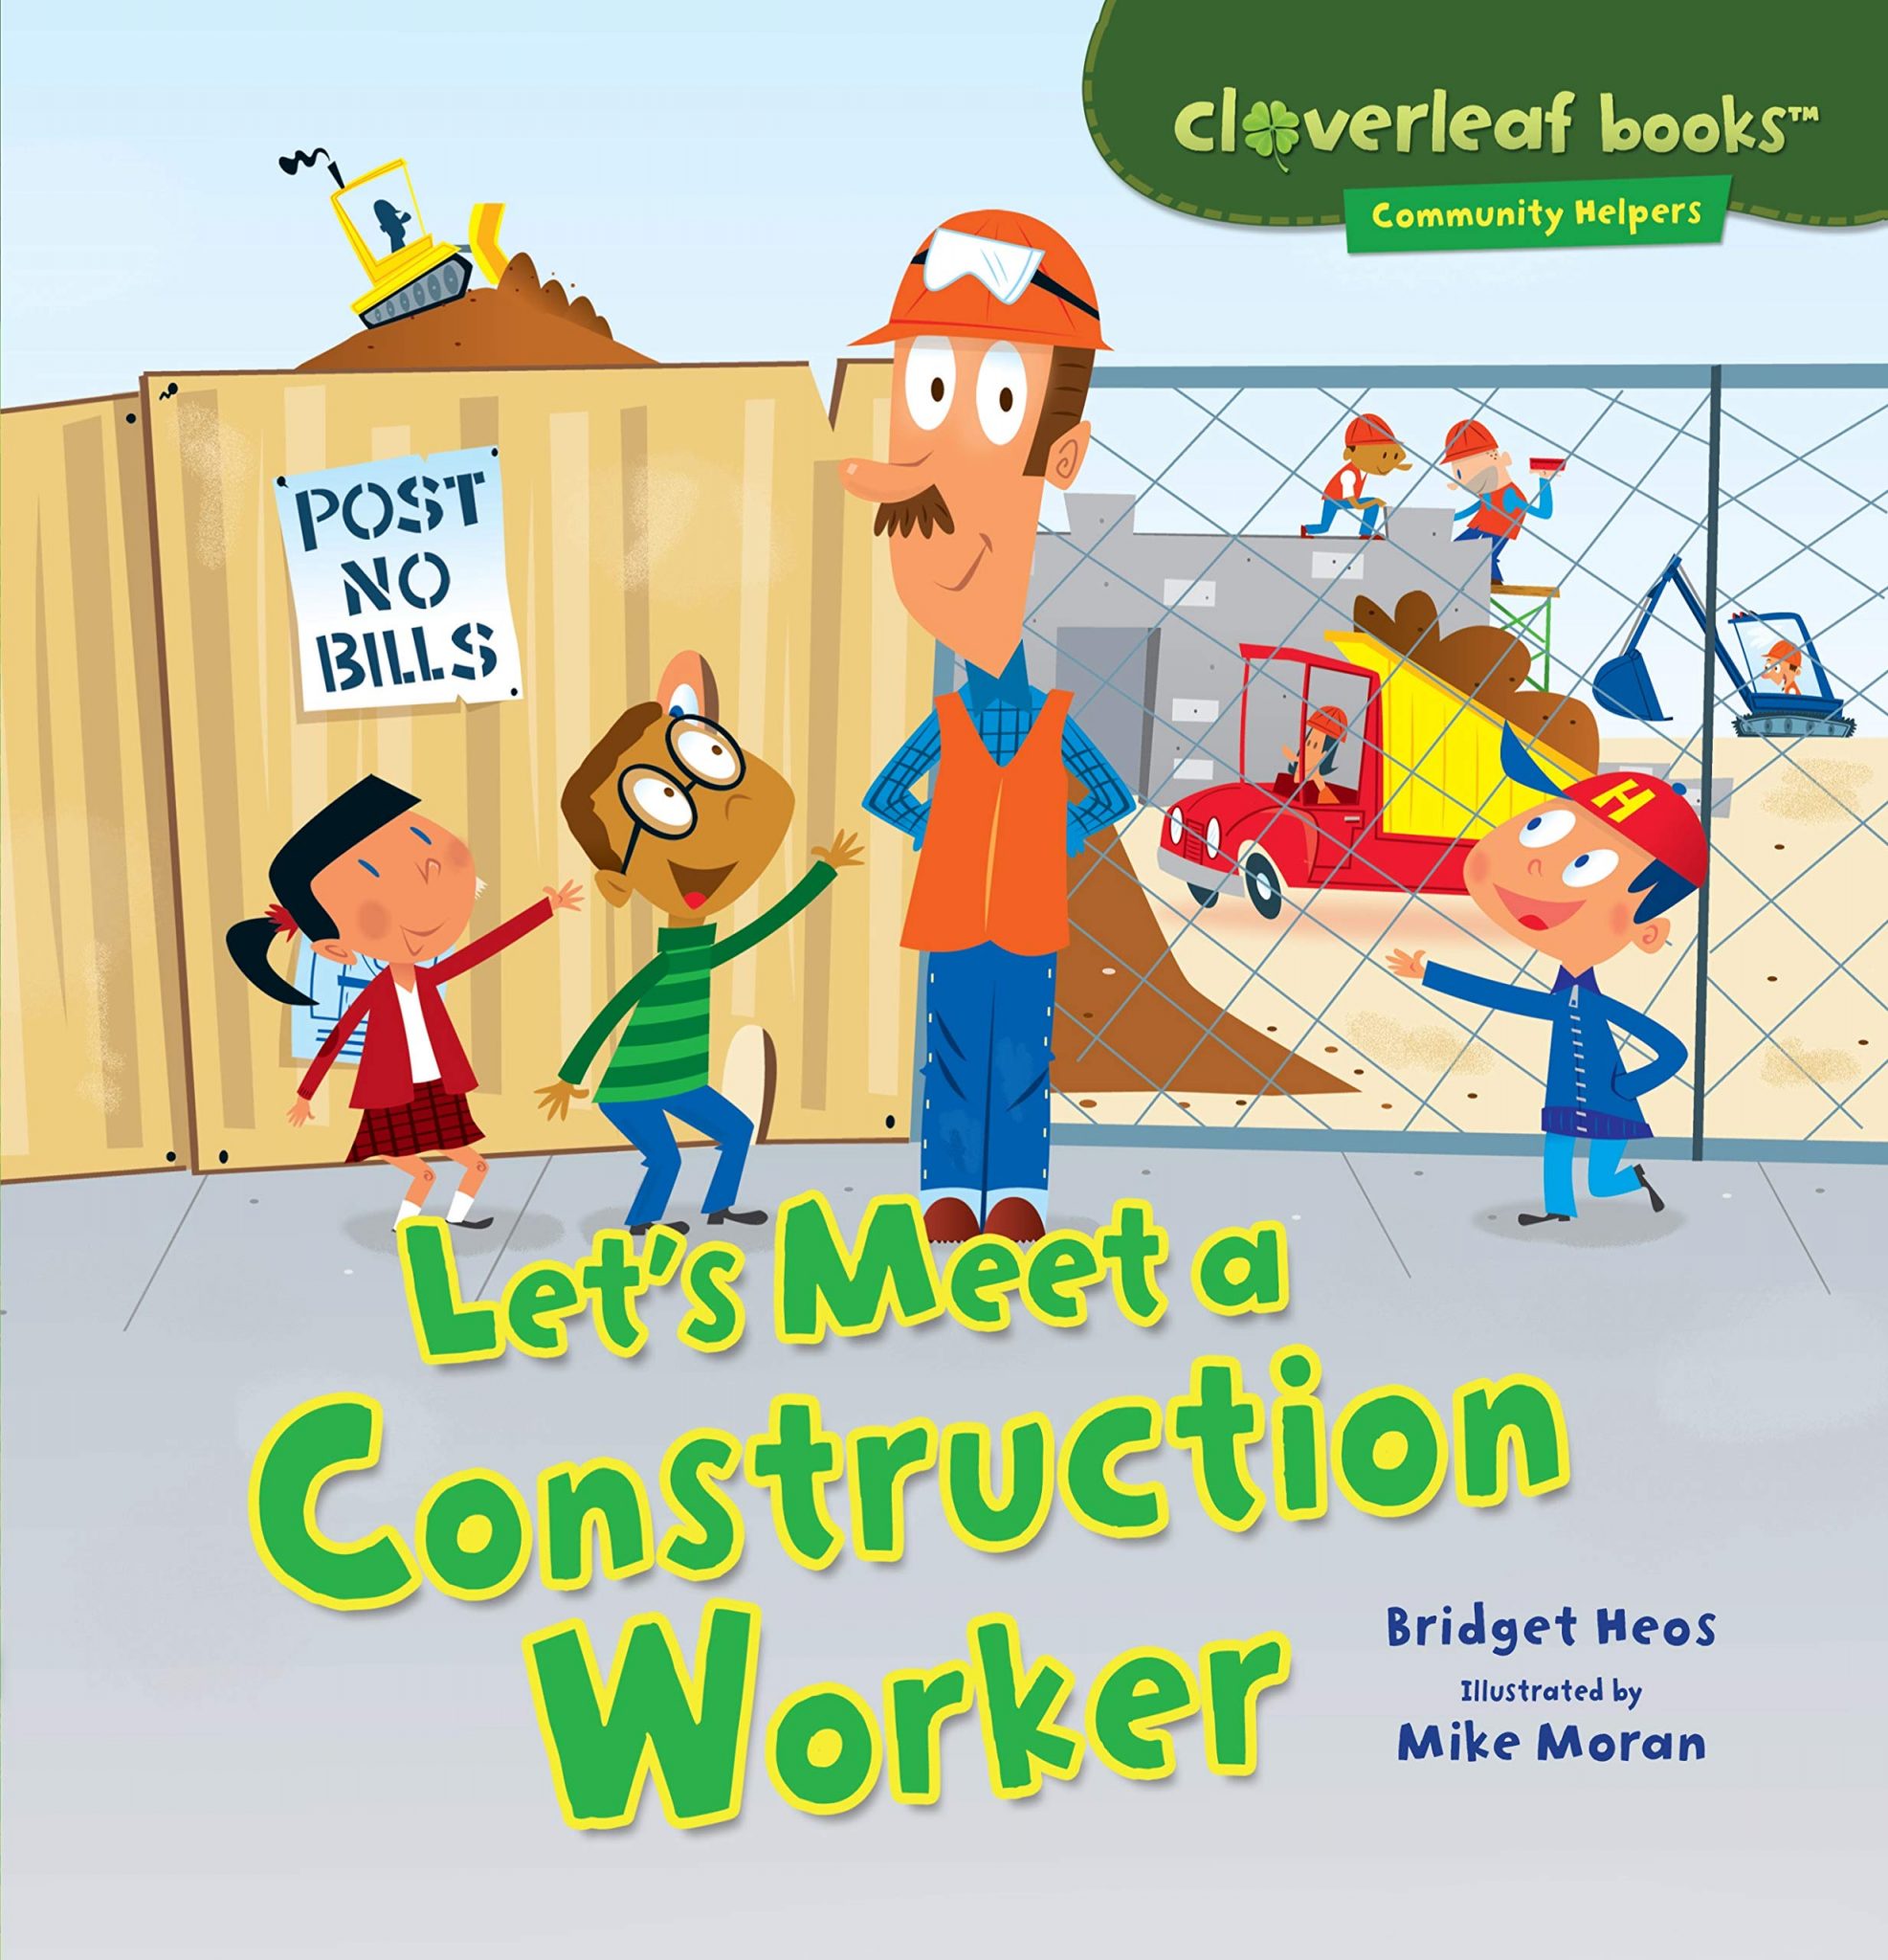 Books for keeping time on construction jobs